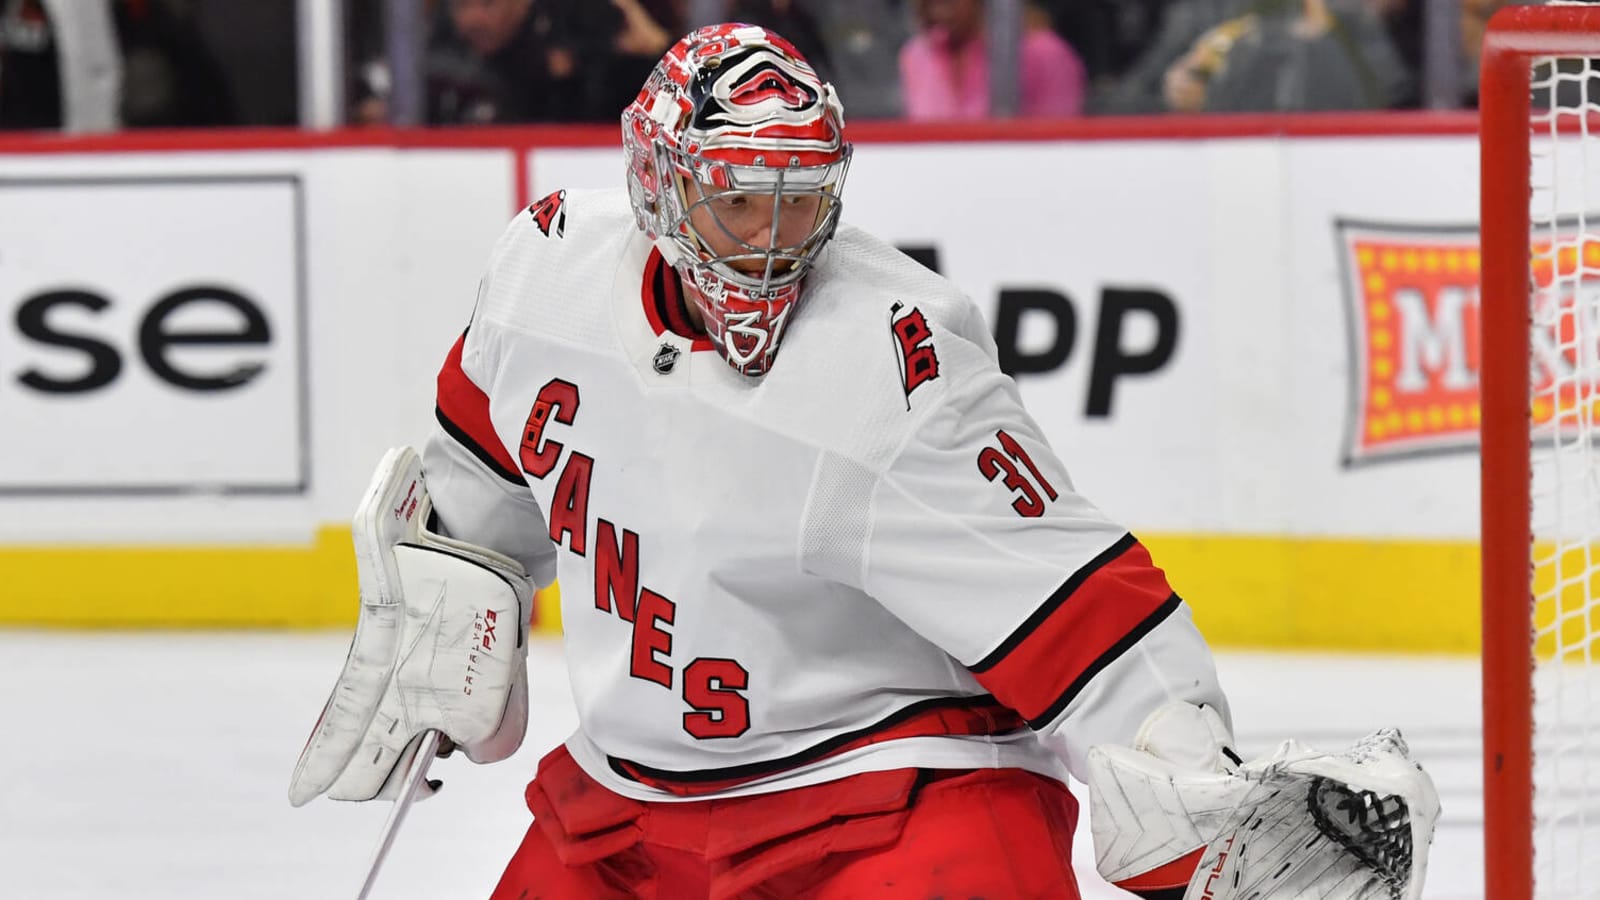 Hurricanes goaltender out indefinitely with blood-clotting issue